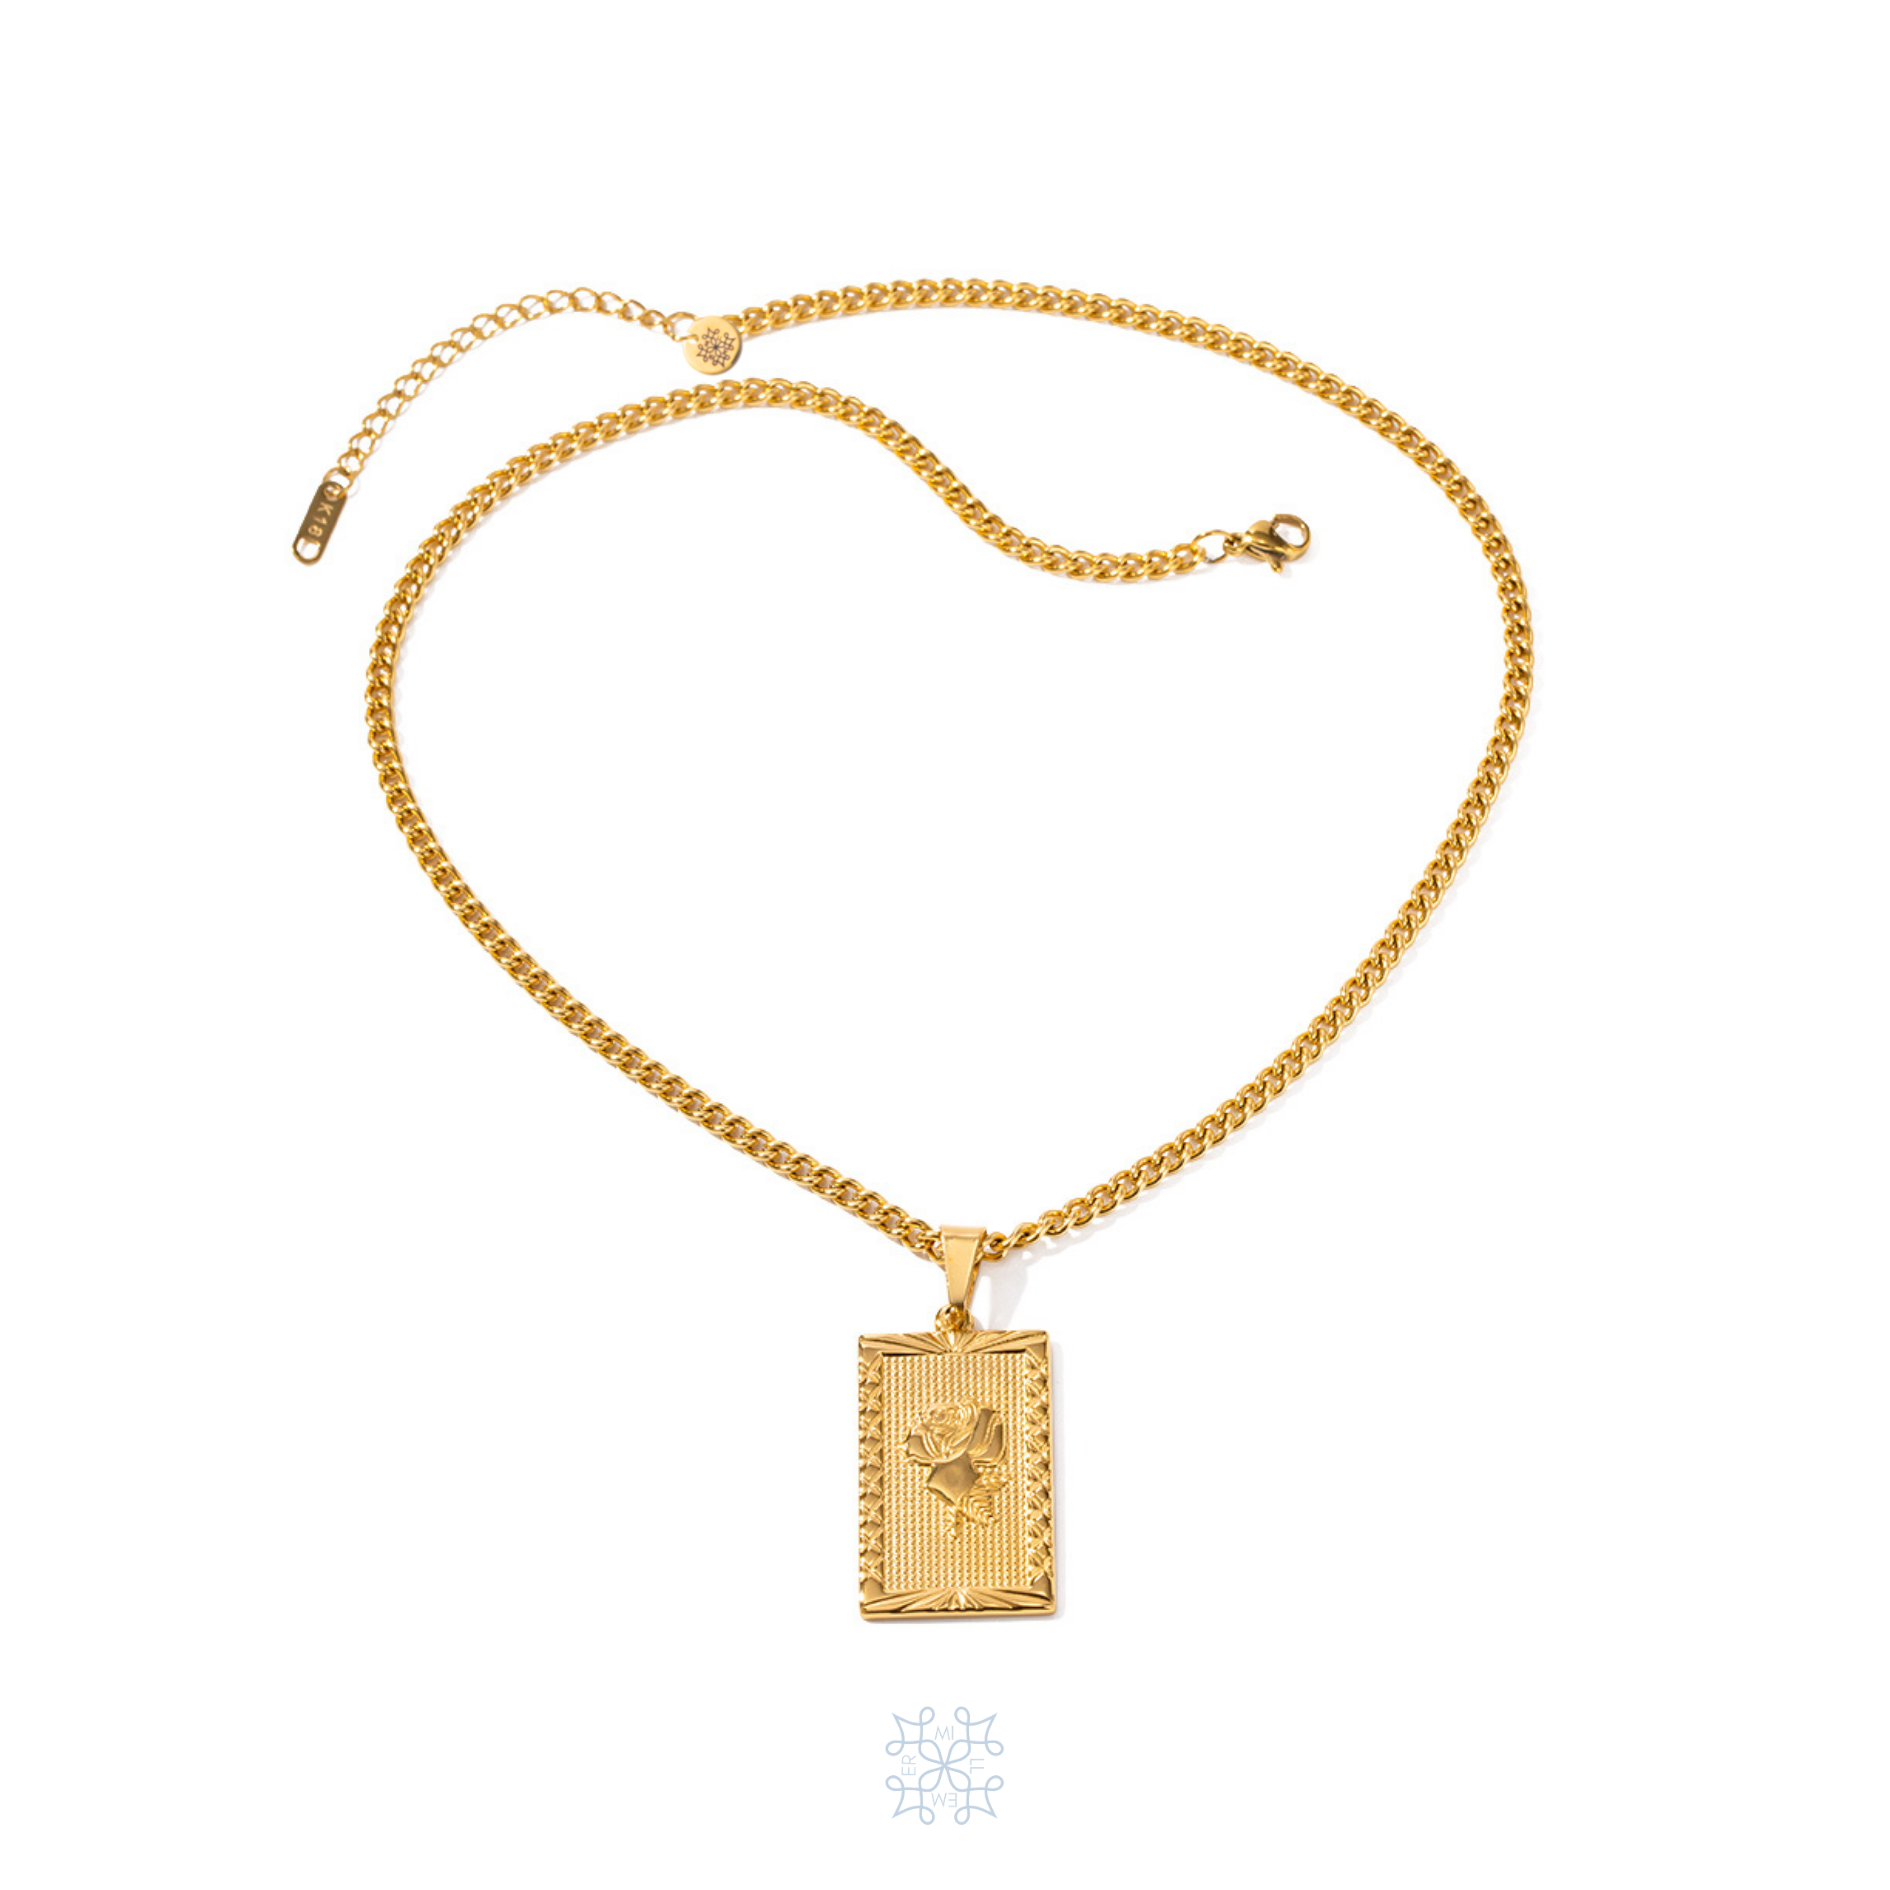 Gold chain necklace with a framed recangular shape pendant. In the center of the pendant is engraved a rose flower. 